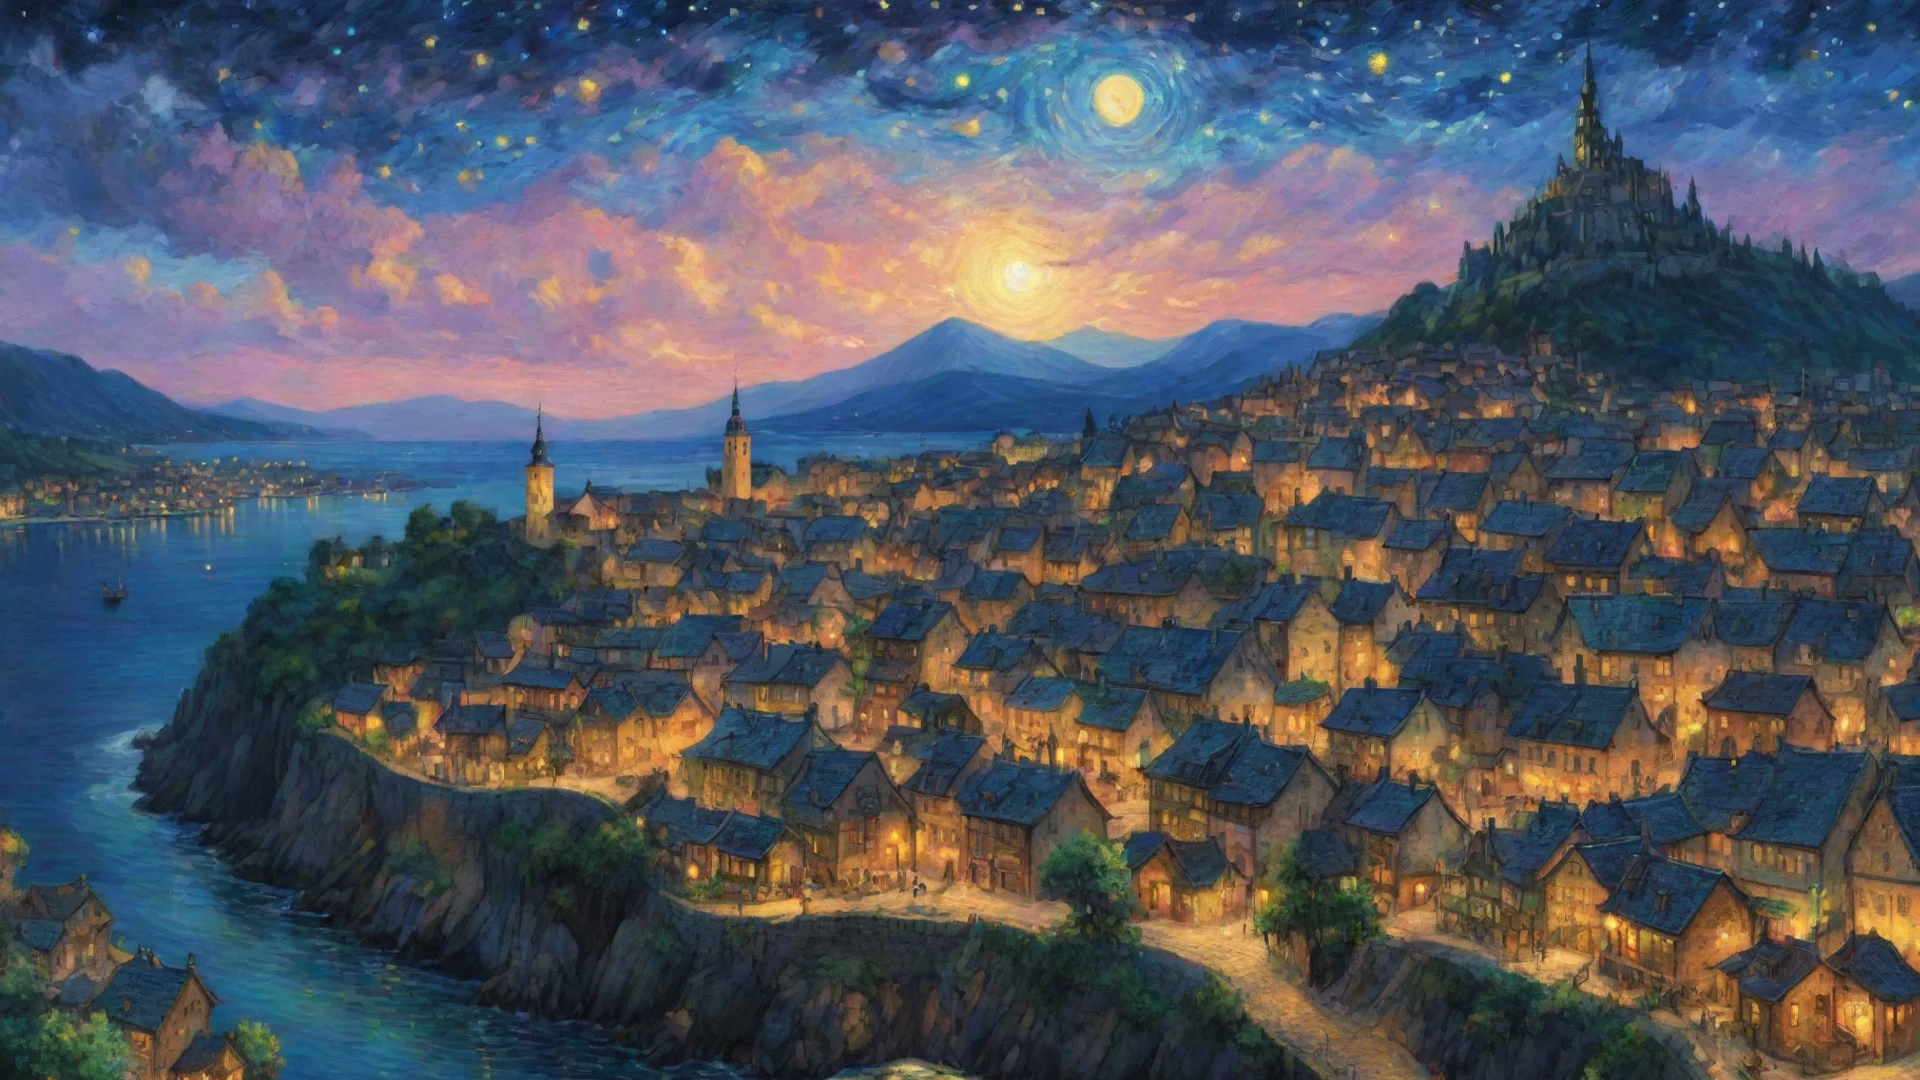 amazing epic town lit up at night sky epic lovely artistic ghibli van gogh happyness bliss peace  detailed asthetic hd wow awesome portrait 2 wide